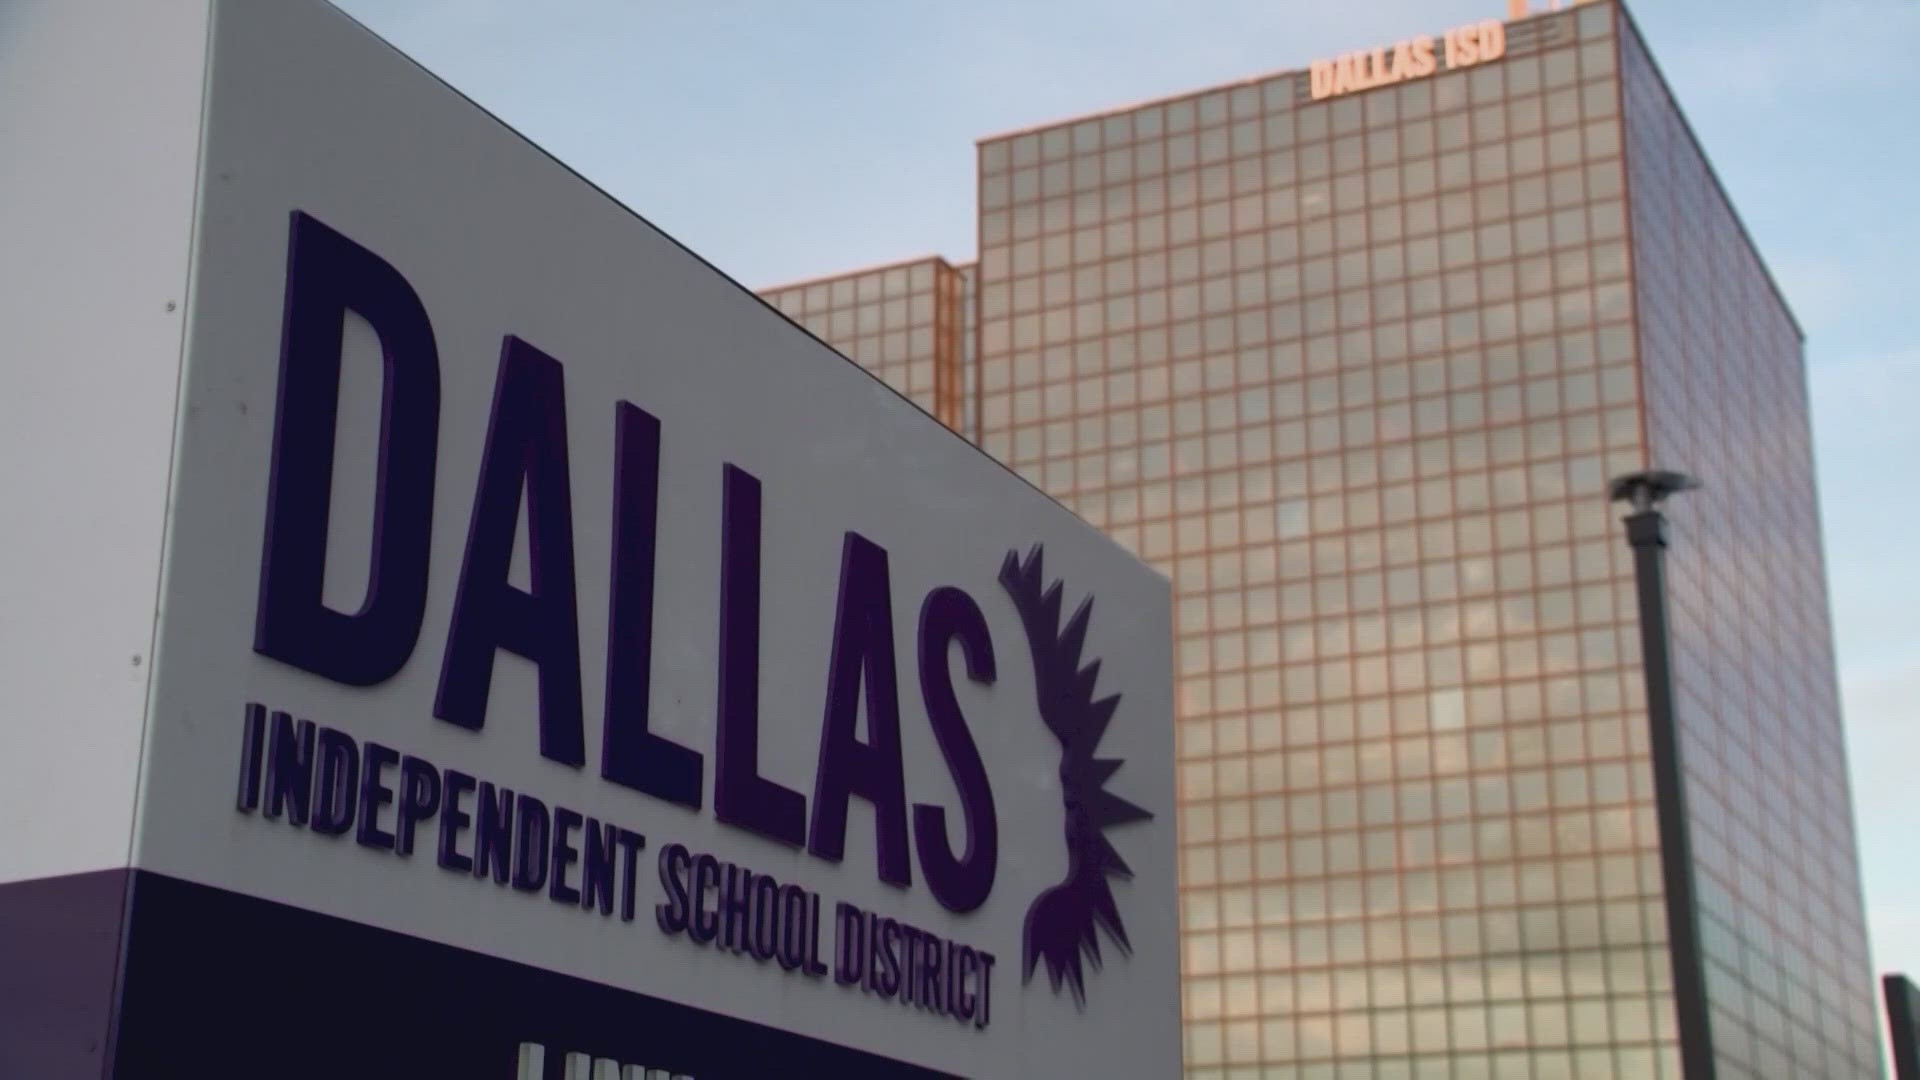 "This could have an impact on property values, student enrollment...you're talking about dollars," Dallas Superintendent Stephanie Elizalde told WFAA.